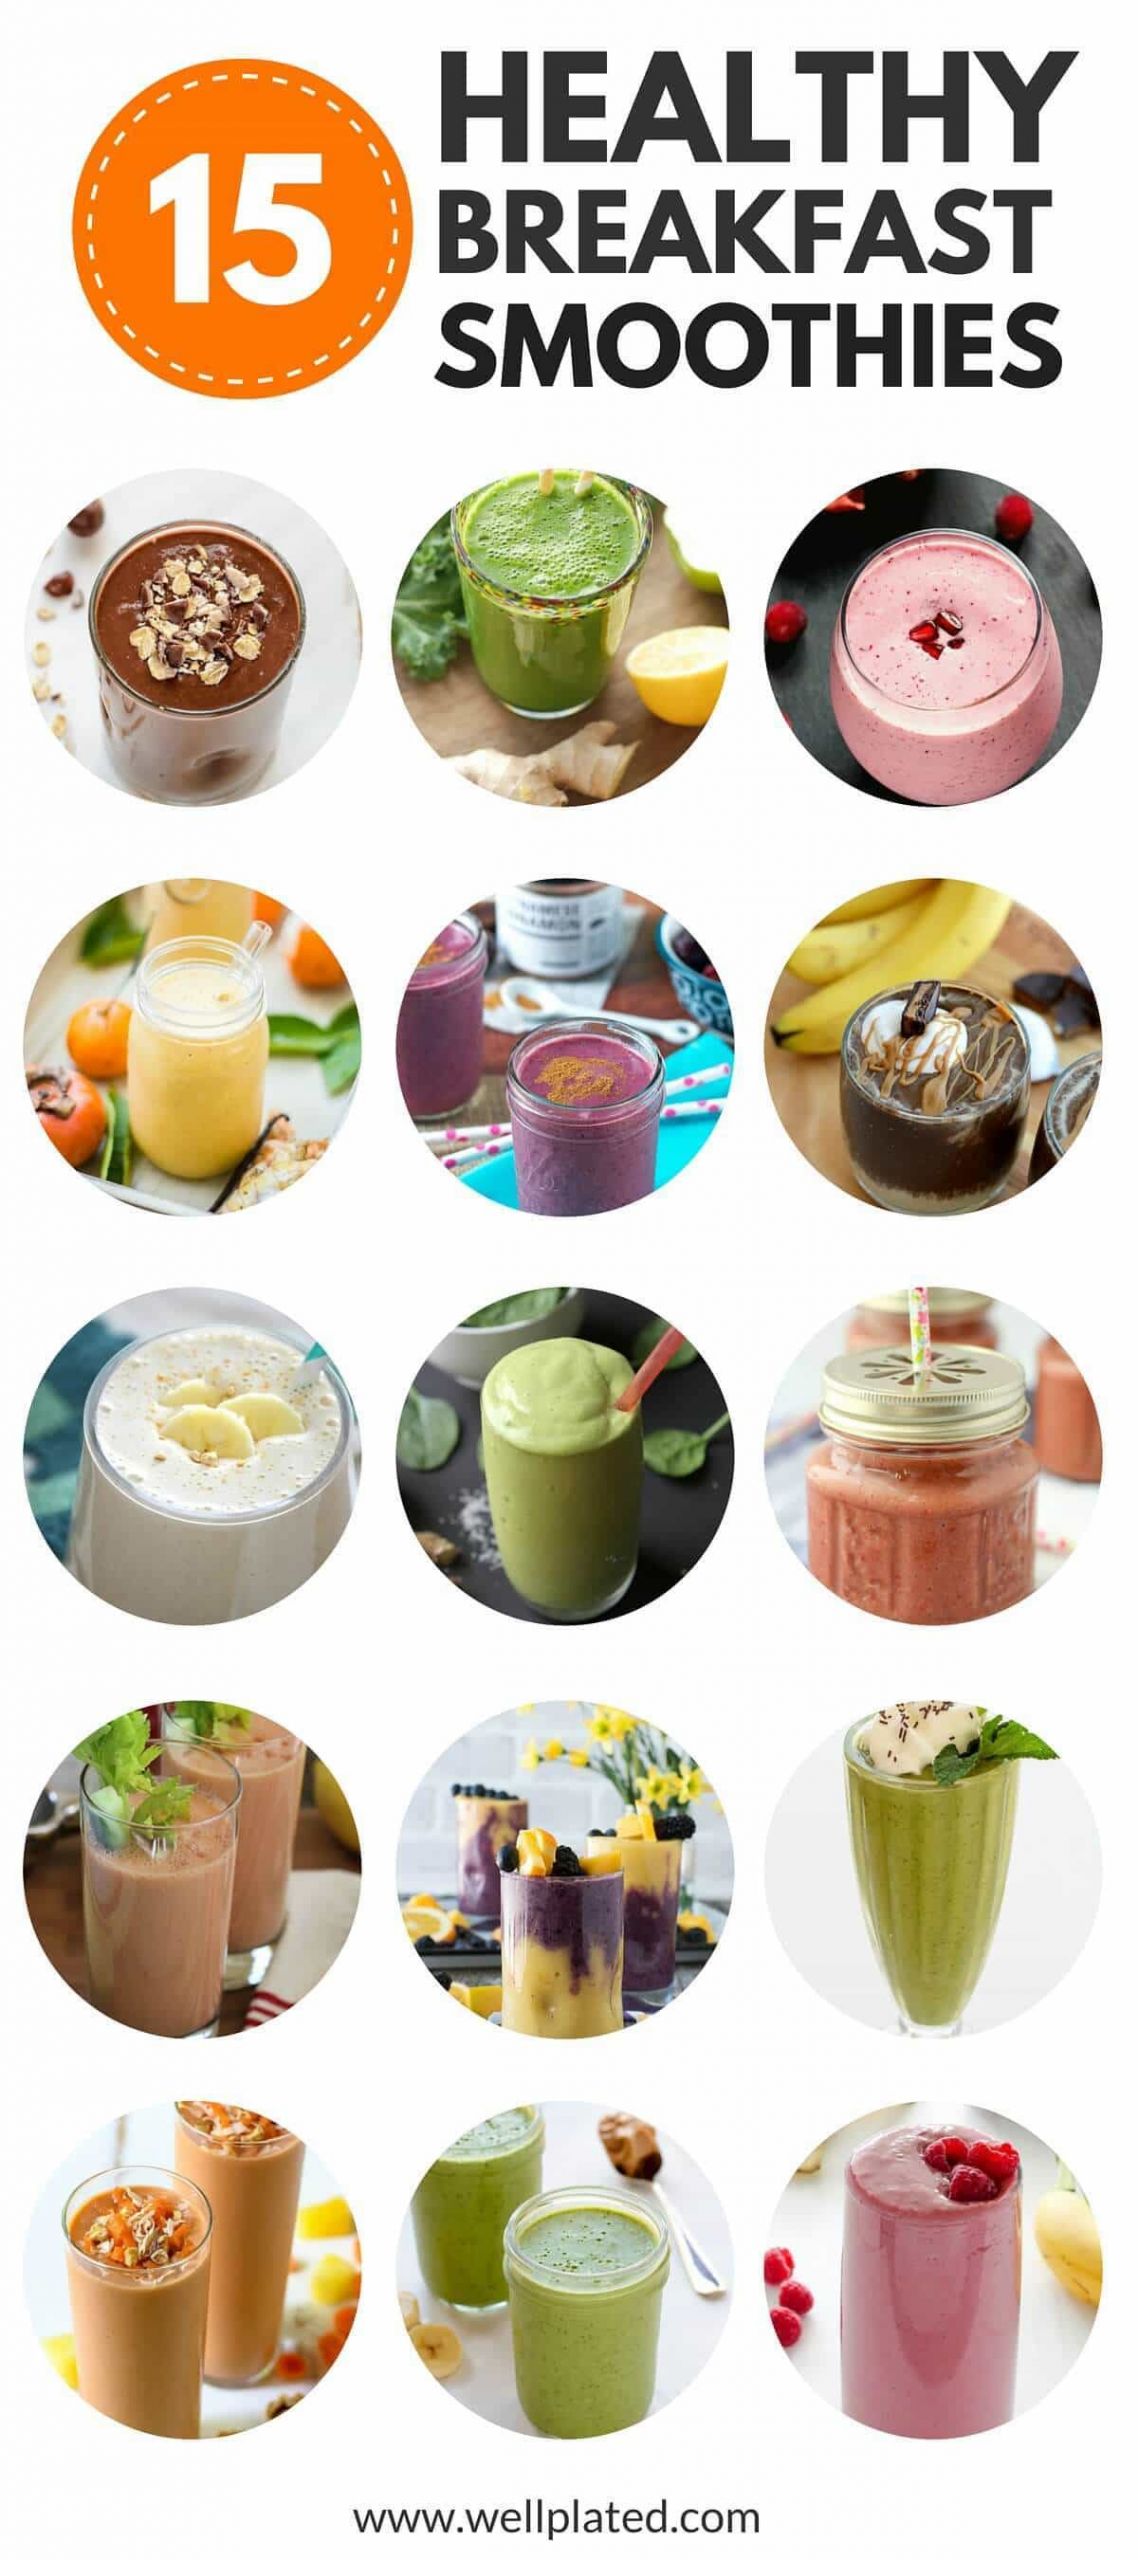 Healthy Shake Recipes For Weight Loss
 The Best 15 Healthy Breakfast Smoothies